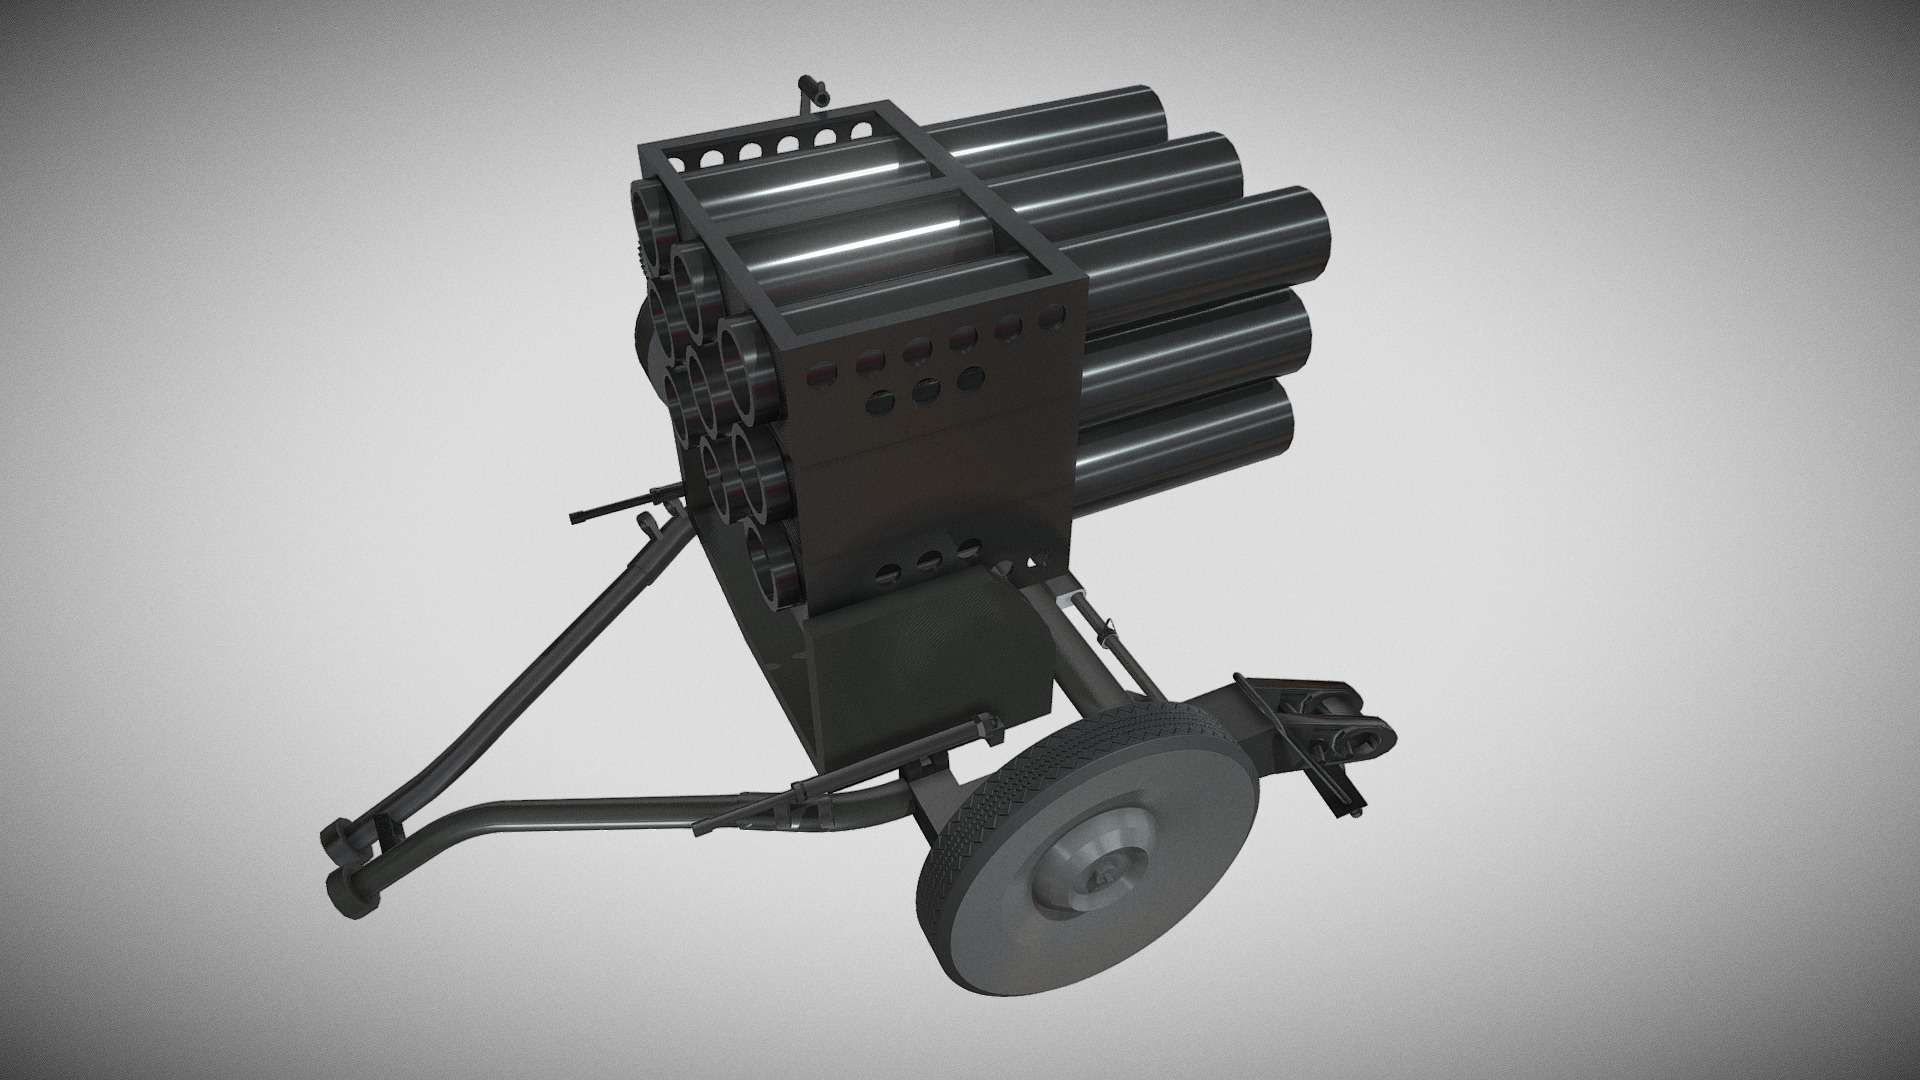 3D model Type 63 Multi Rocket Launcher - This is a 3D model of the Type 63 Multi Rocket Launcher. The 3D model is about a camera on a stand.